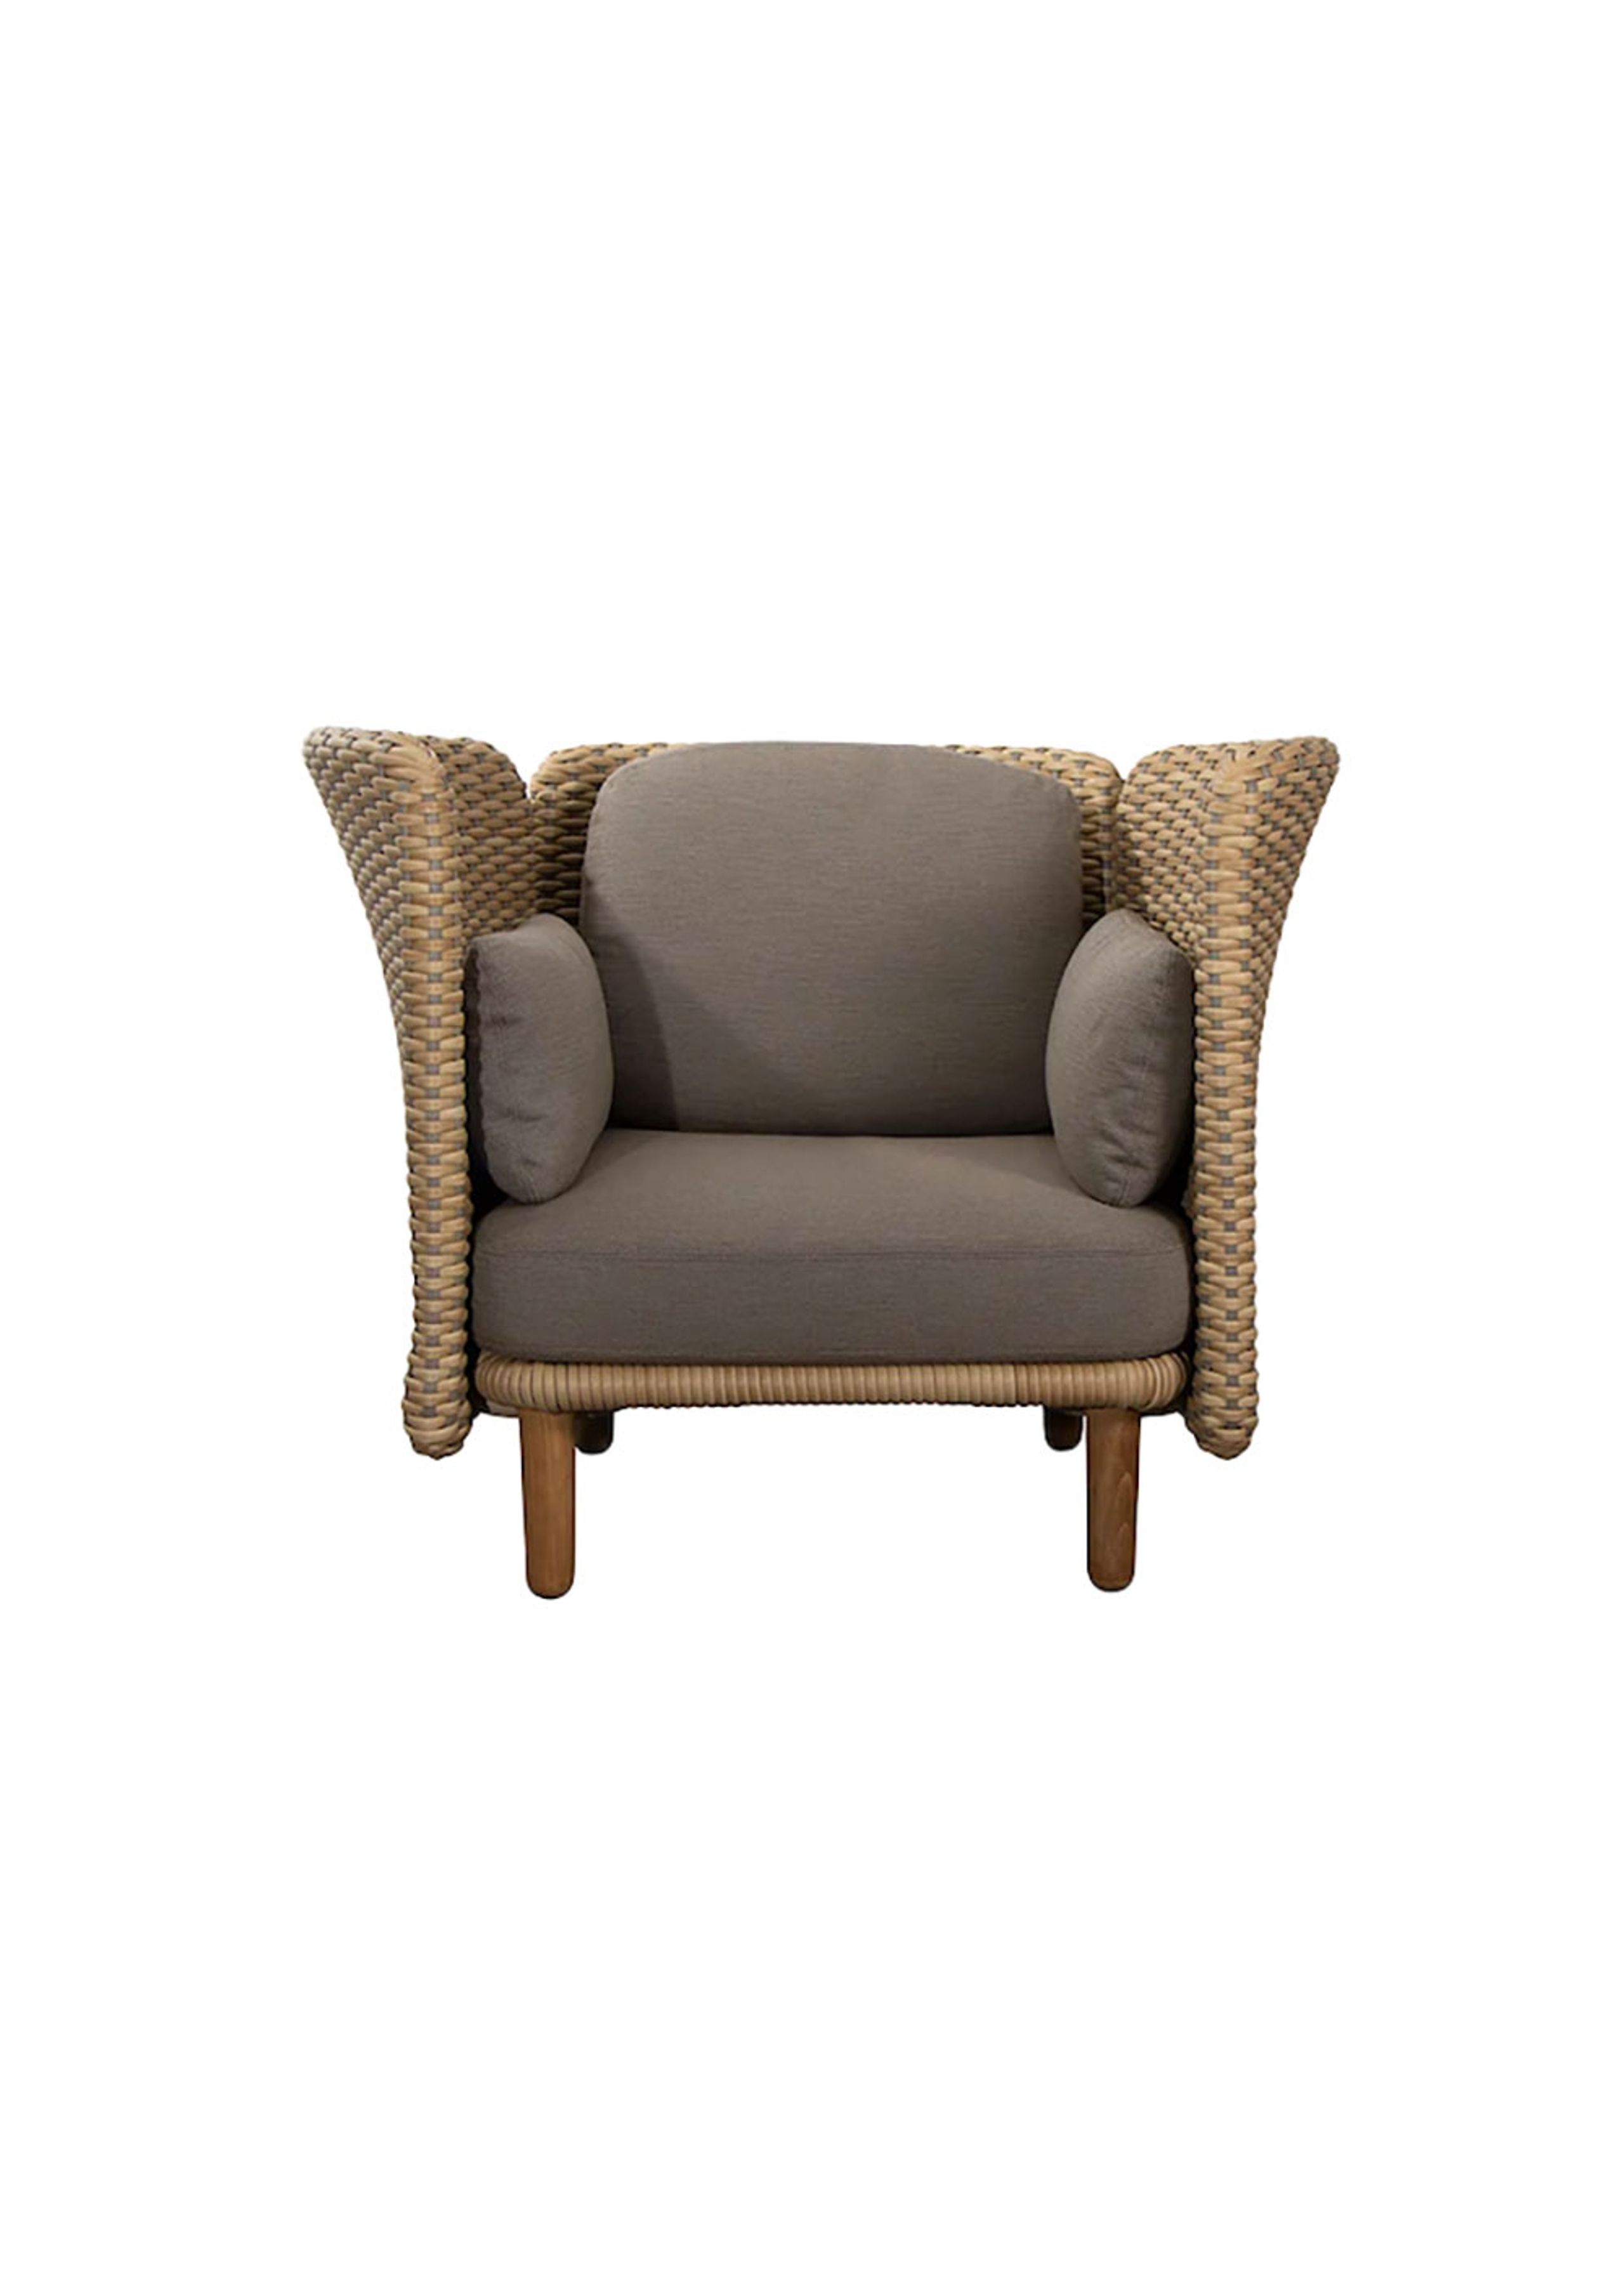 Cane-line - Lounge chair - Arch Lounge Chair w. Low Arm/Backrest - Natural/Taupe, Cane-line Flat Weave